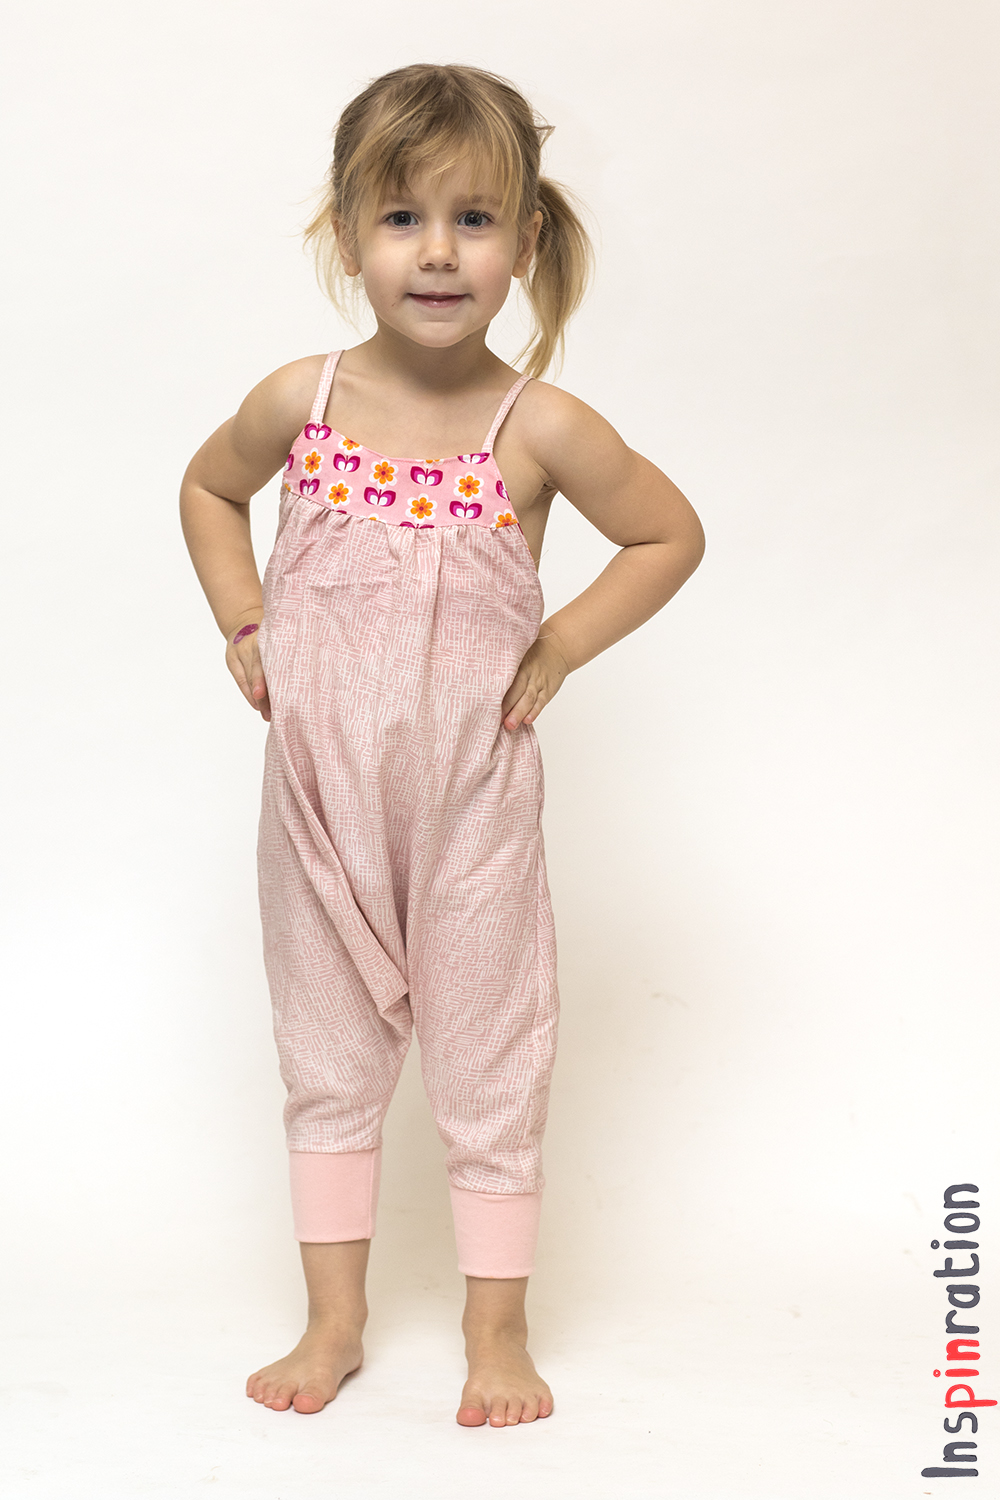 Inspinration: Barefoot romper release by Twig and Tale